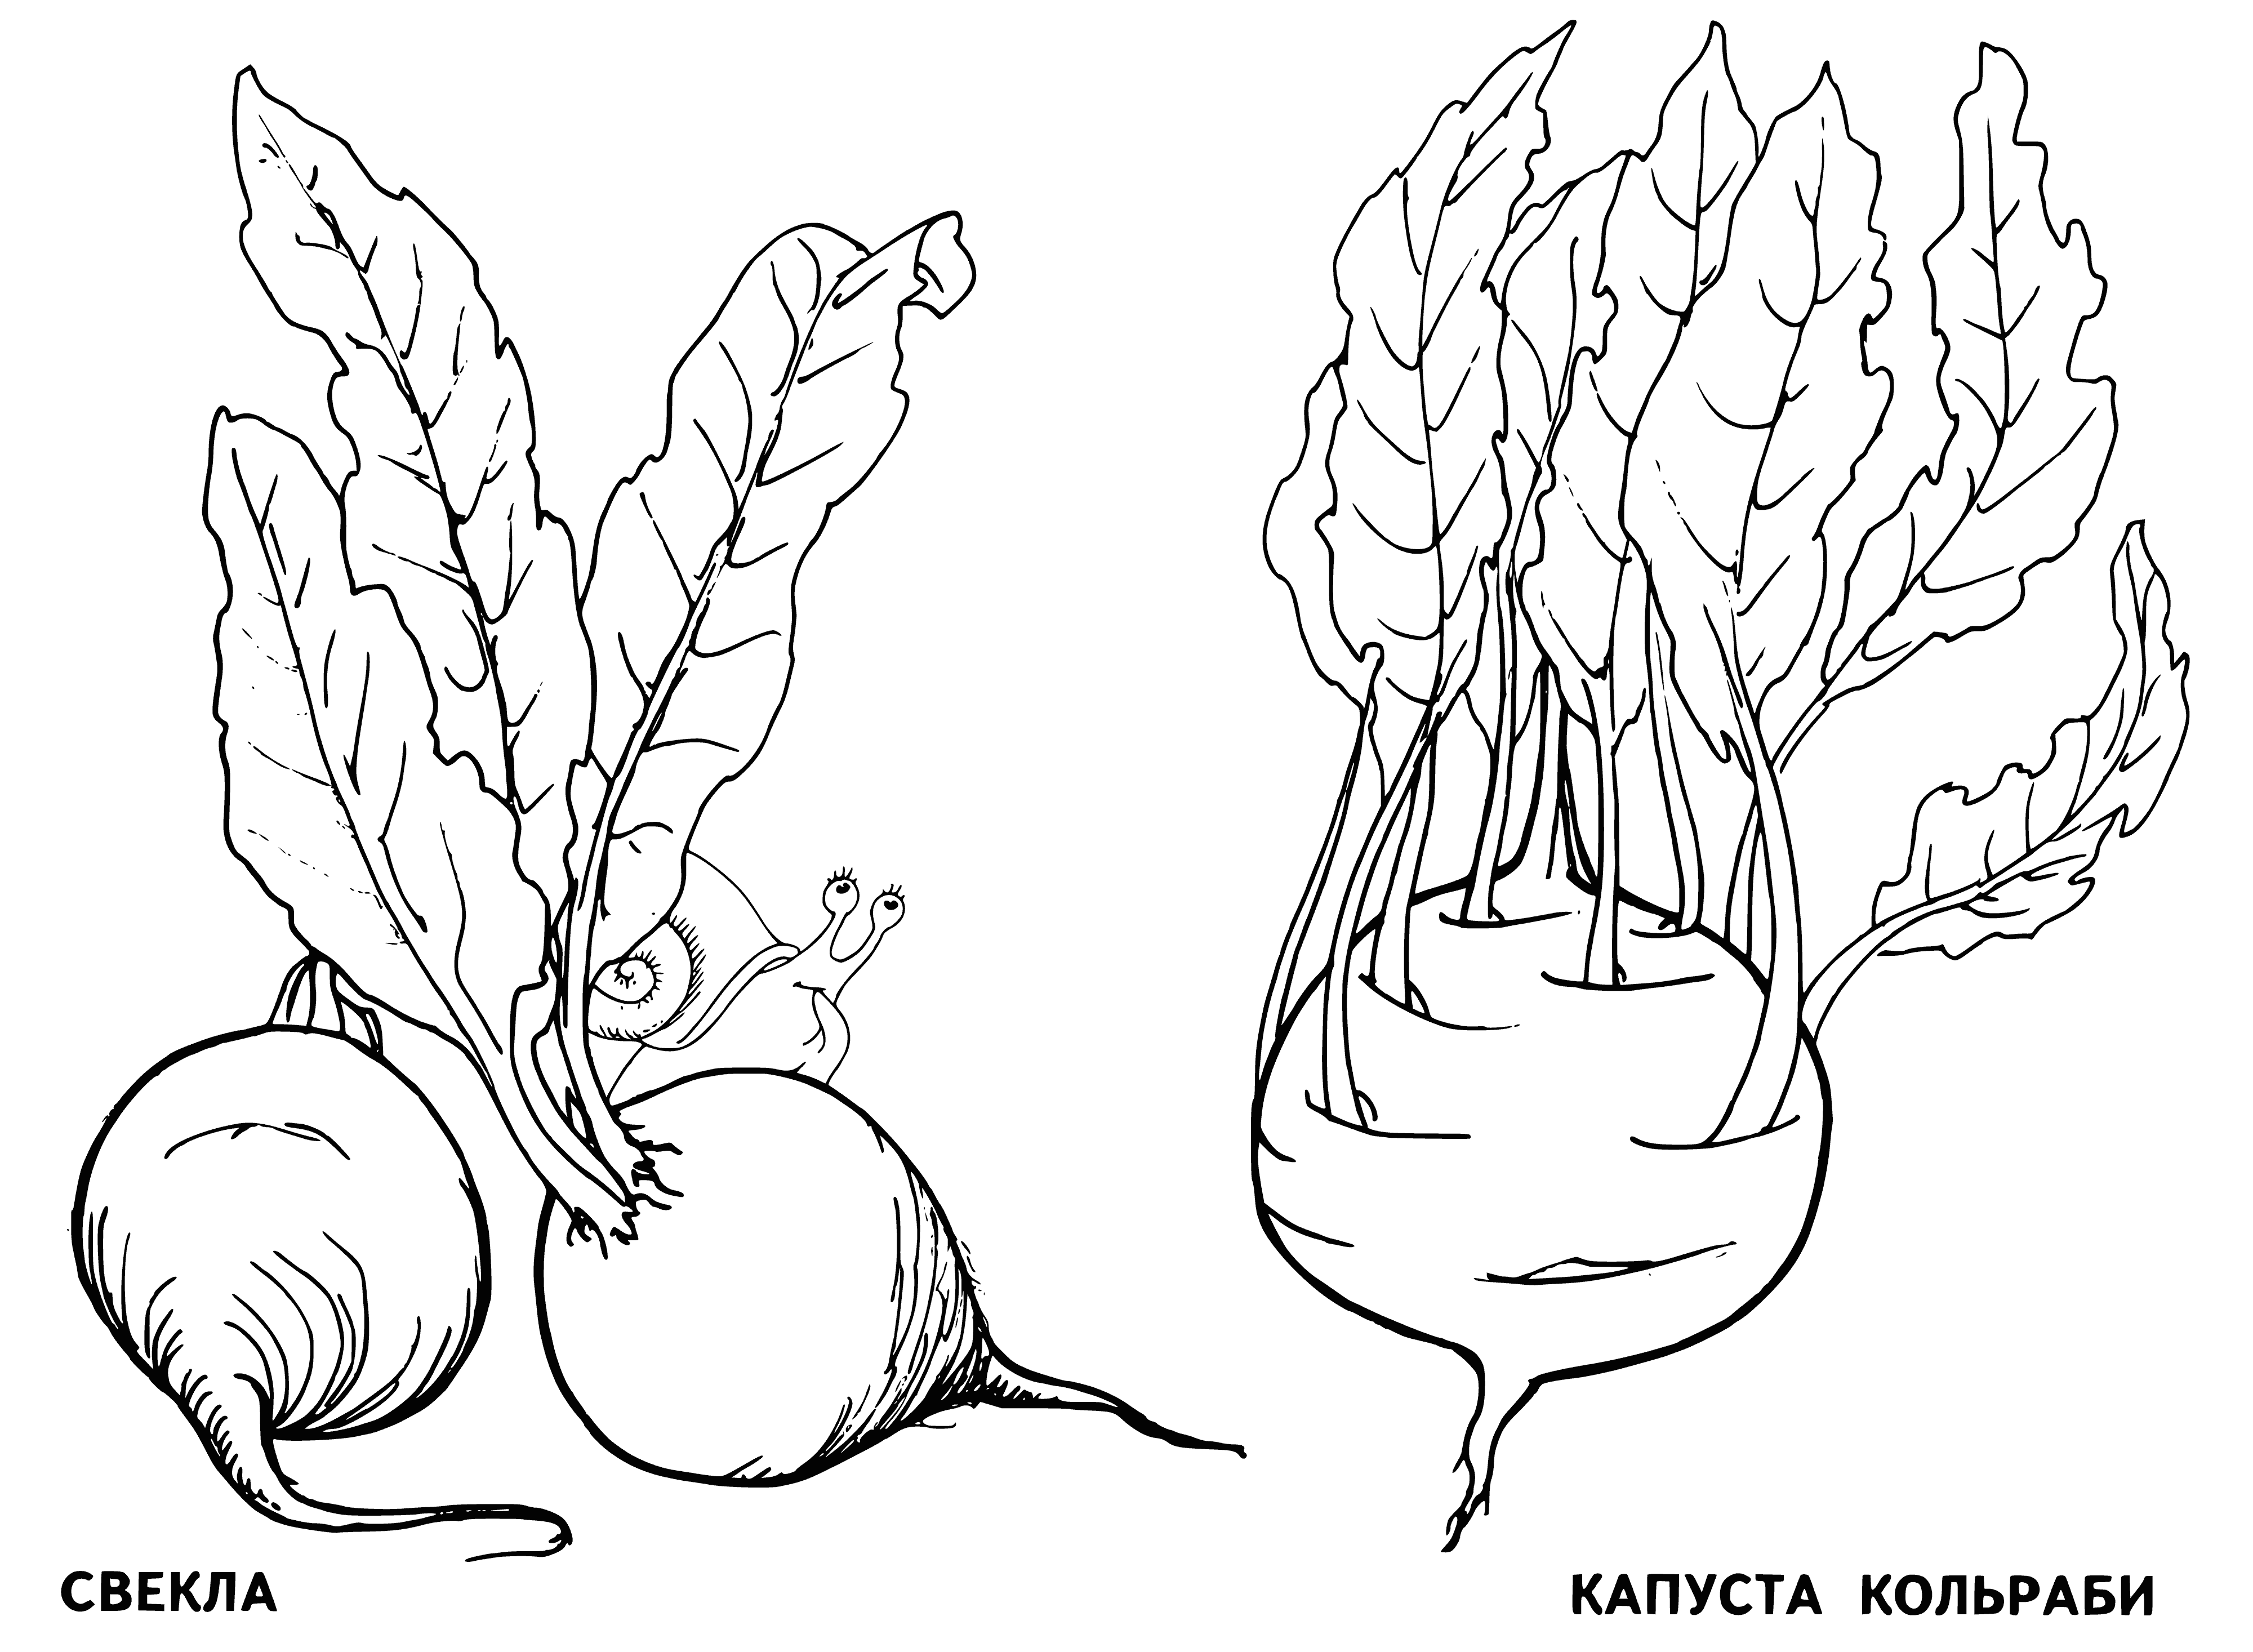 coloring page: Beetroot and kohlrabi are round red veggies; beetroot smooth and smaller, kohlrabi bumpy and purple, both with green leaves. #veggies